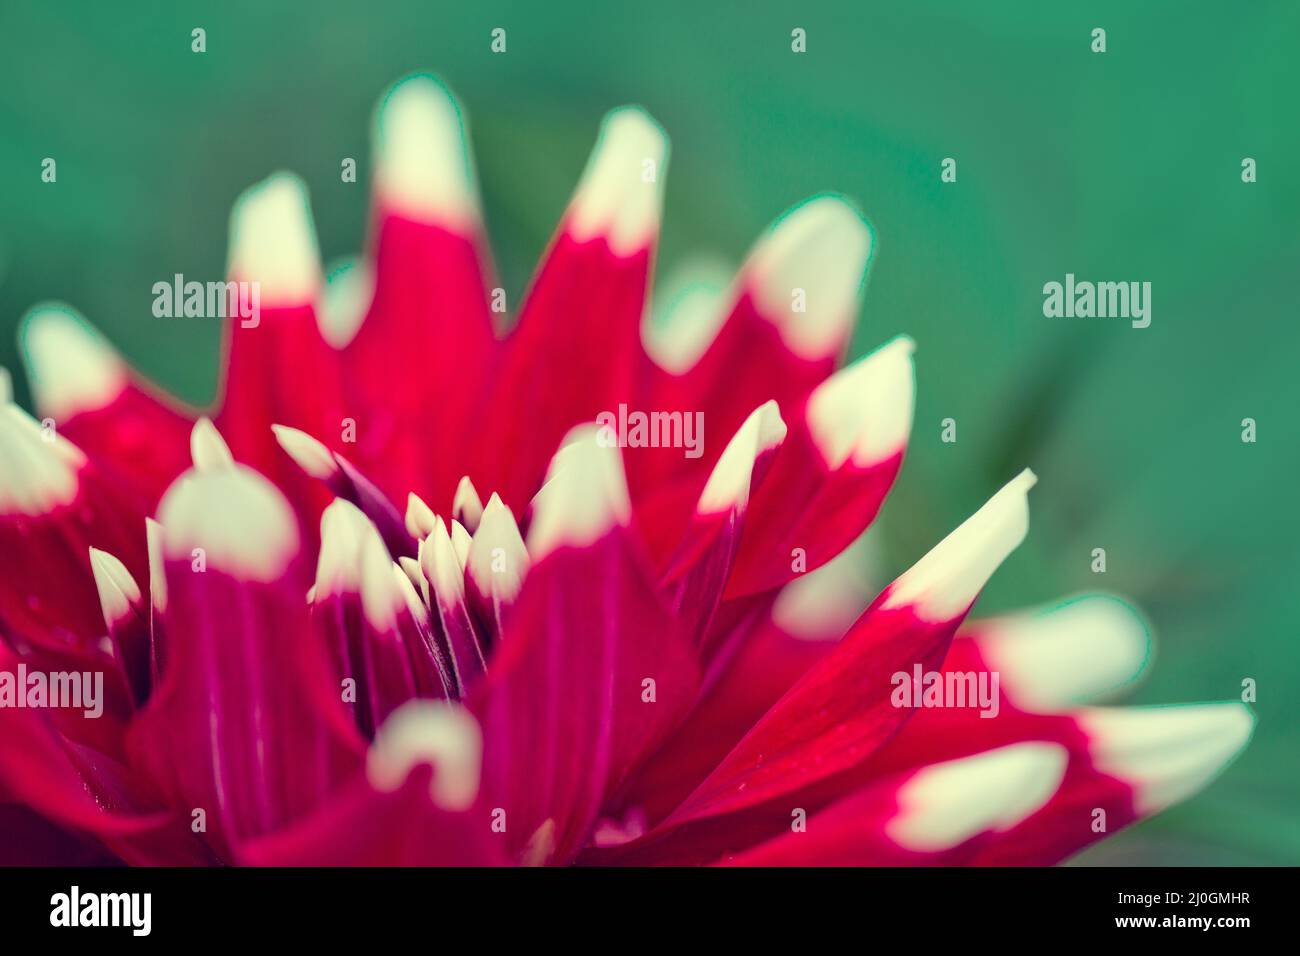 Red dahlia isolated on green blur background. Stock Photo